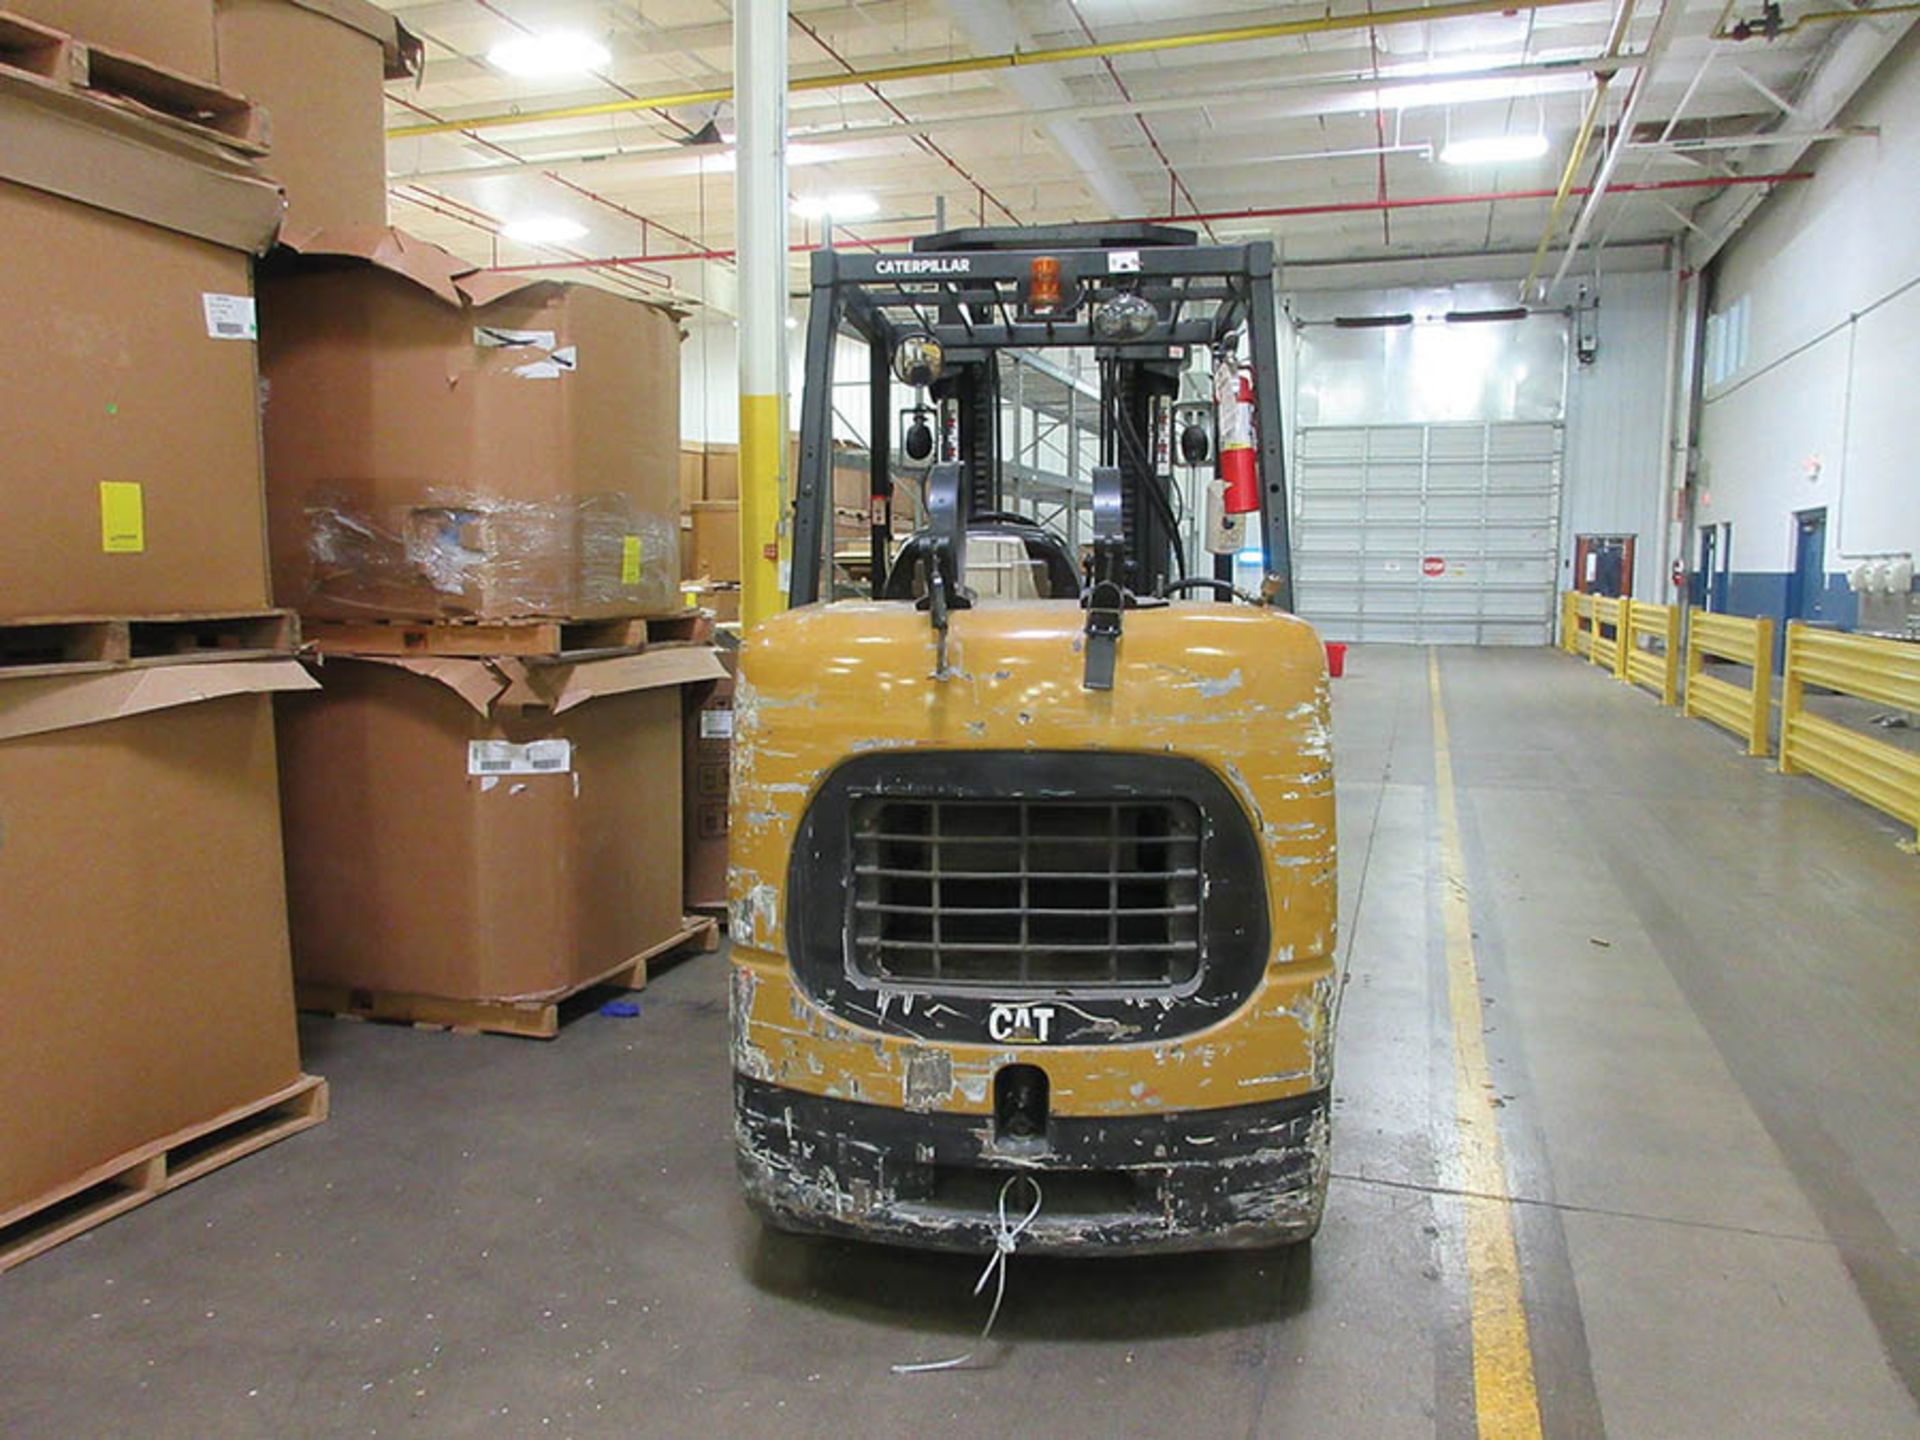 CATERPILLAR 10,000-LB. CAP. LPG FORKLIFT, 3-STAGE MAST, SIDE SHIFT, 209'' MAX LOAD HEIGHT, LEVER - Image 3 of 6